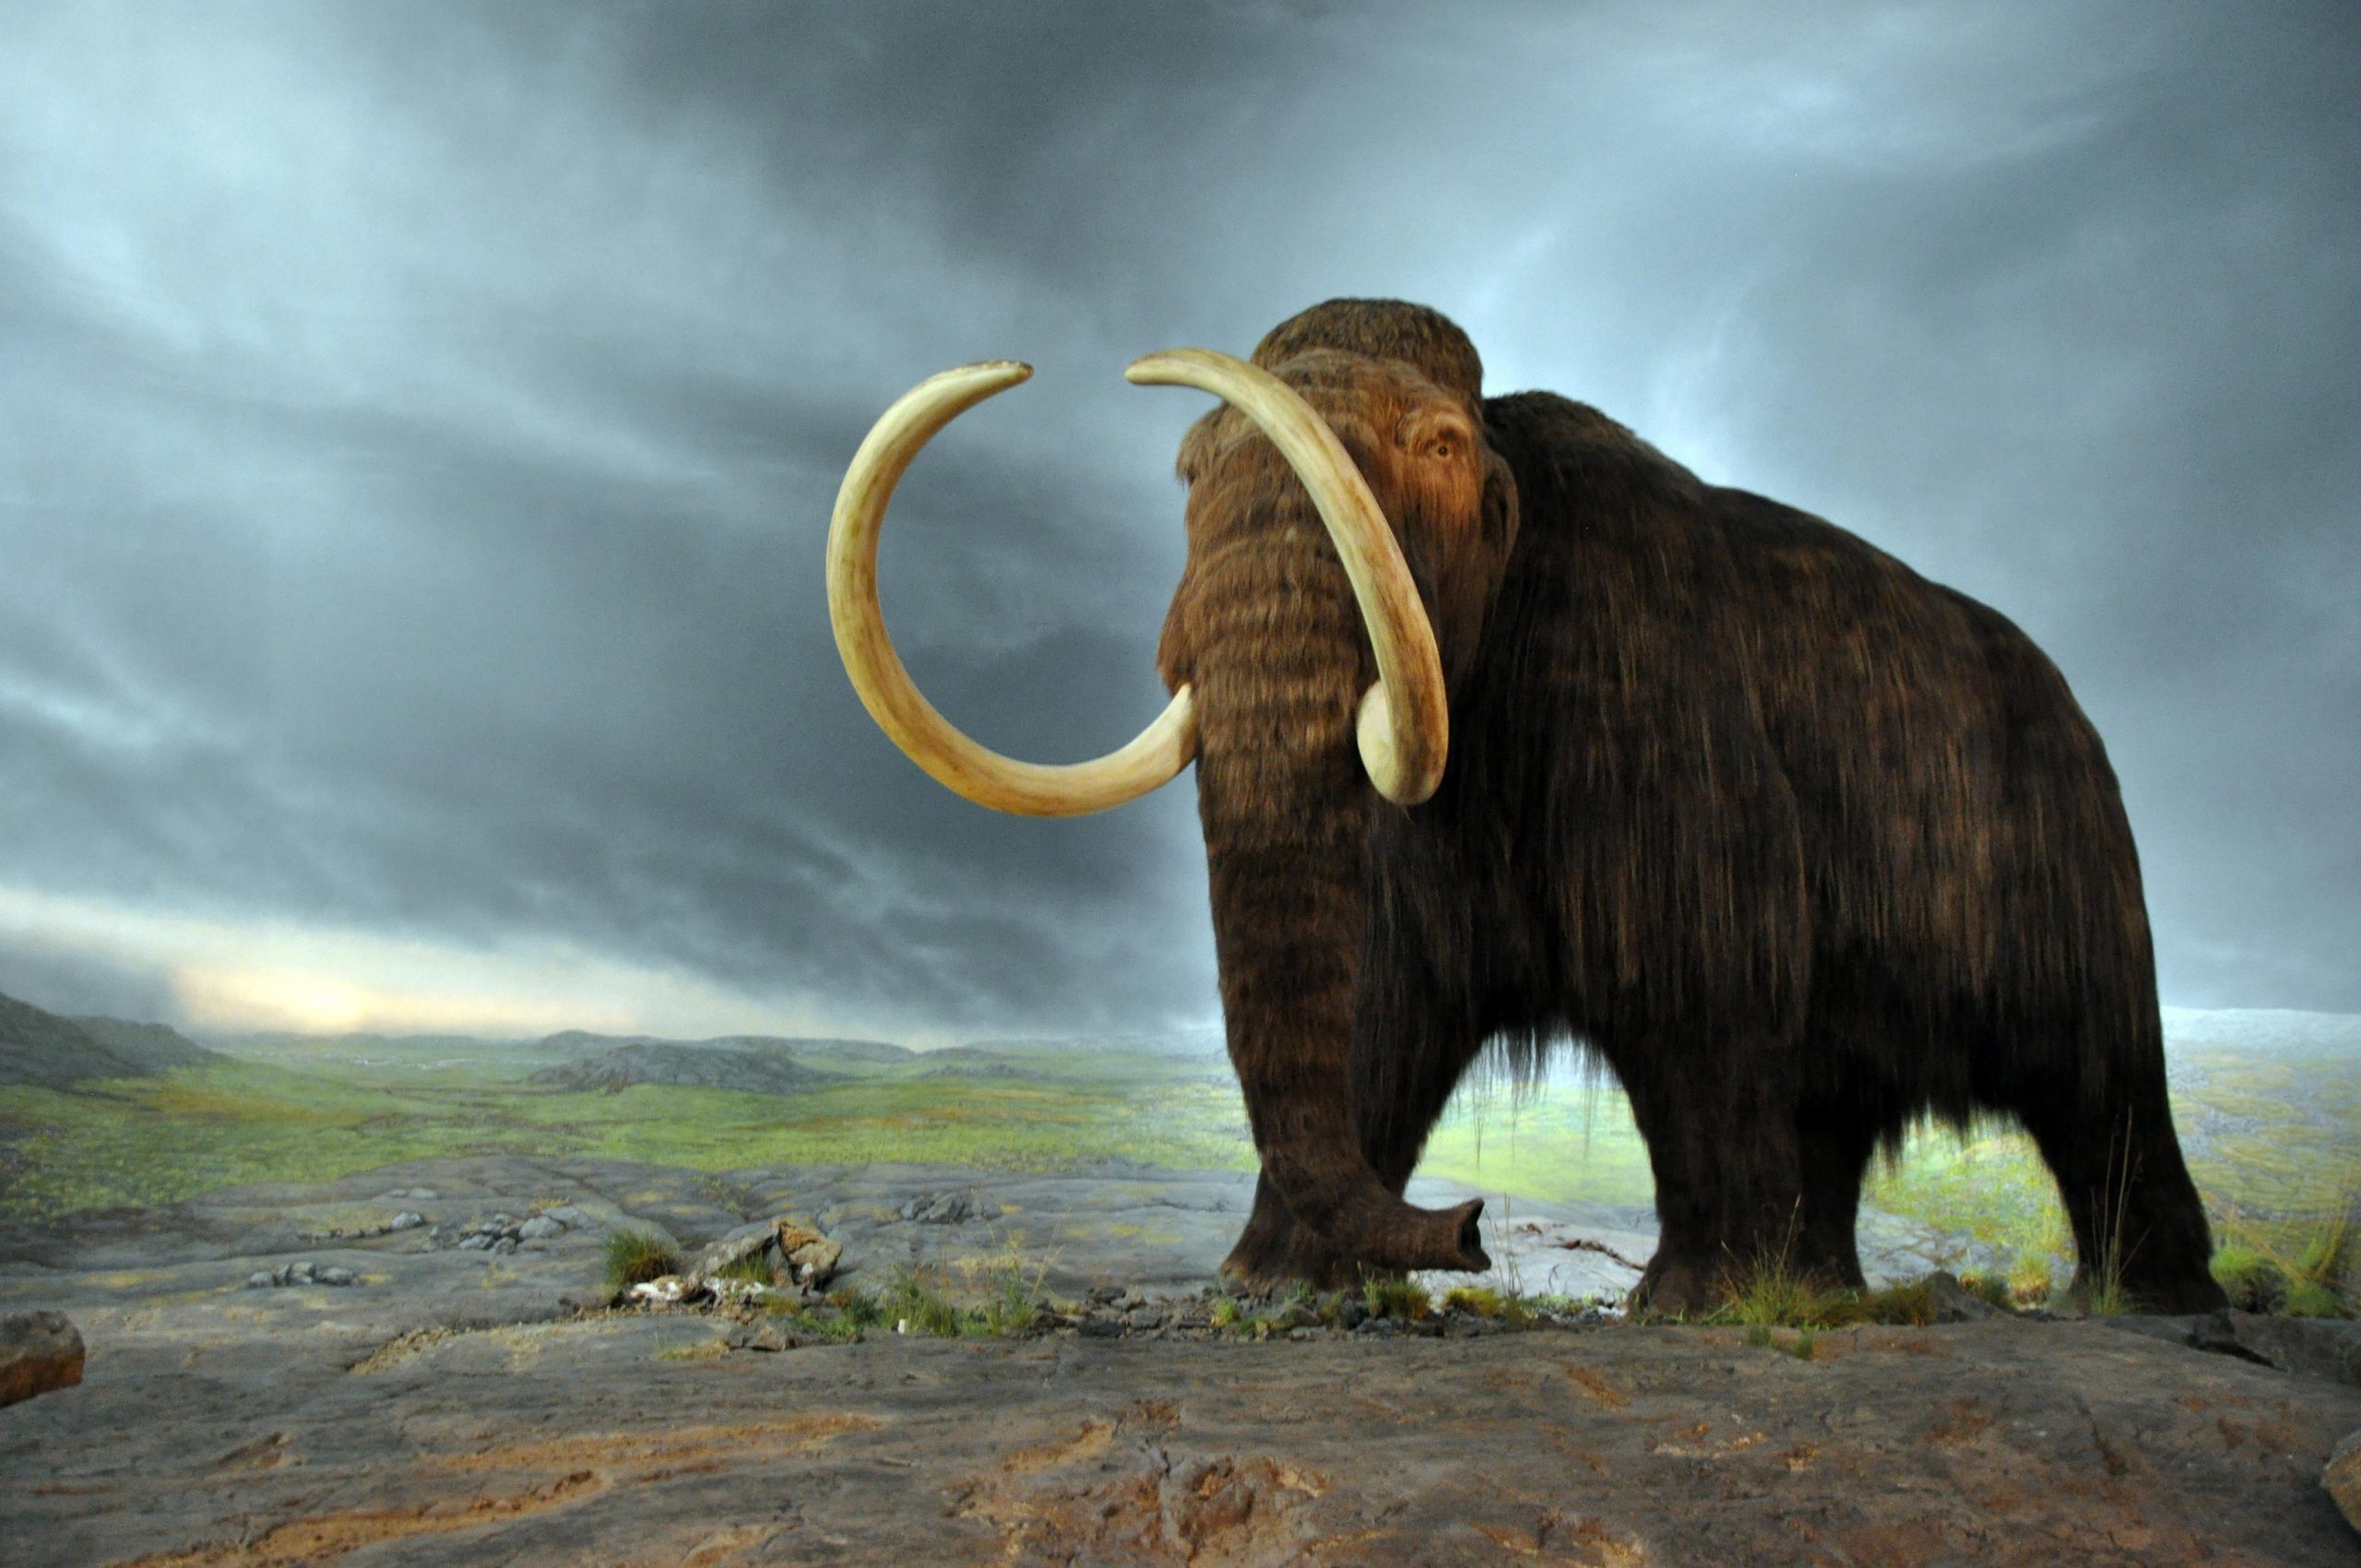 The first people in New England may have shared the landscape with wolly mammoths